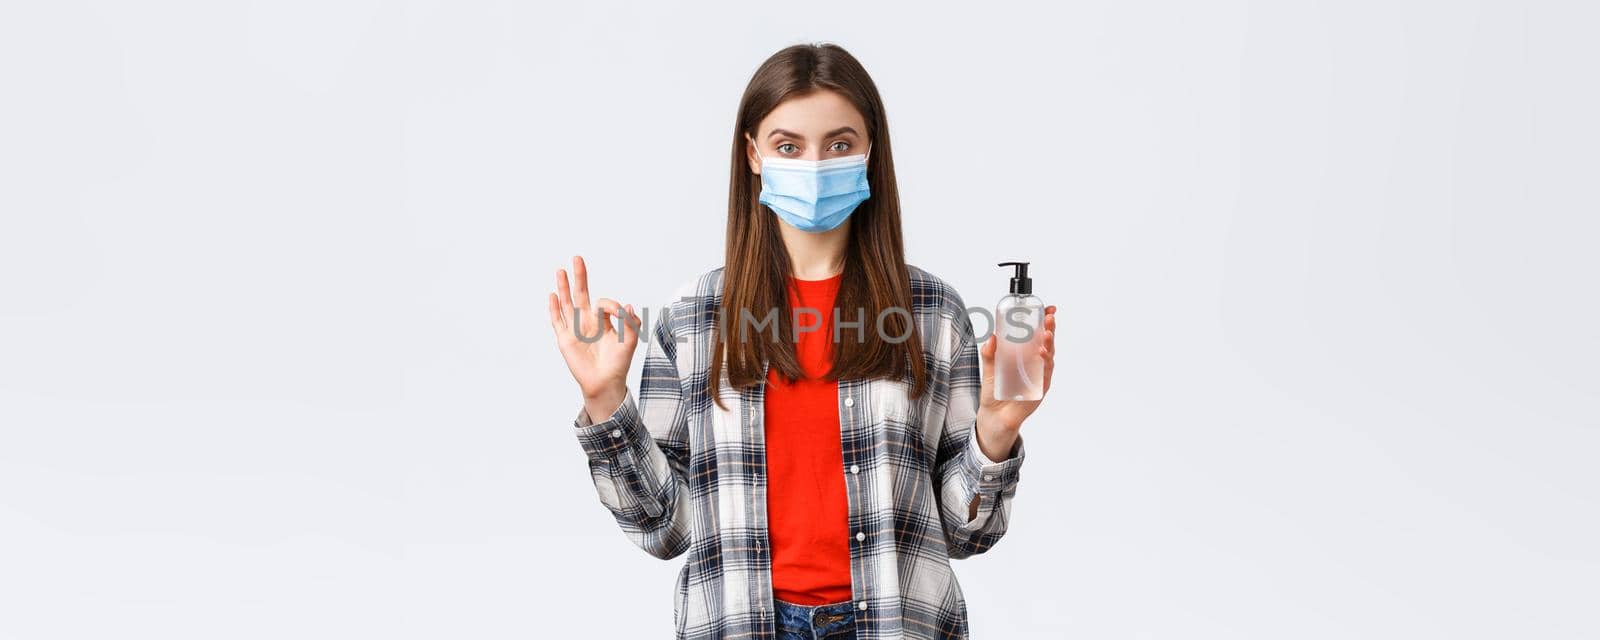 Coronavirus outbreak, leisure on quarantine, social distancing and emotions concept. Pleased assured young woman in medical mask recommend buy this hand sanitizer brand, show okay sign.